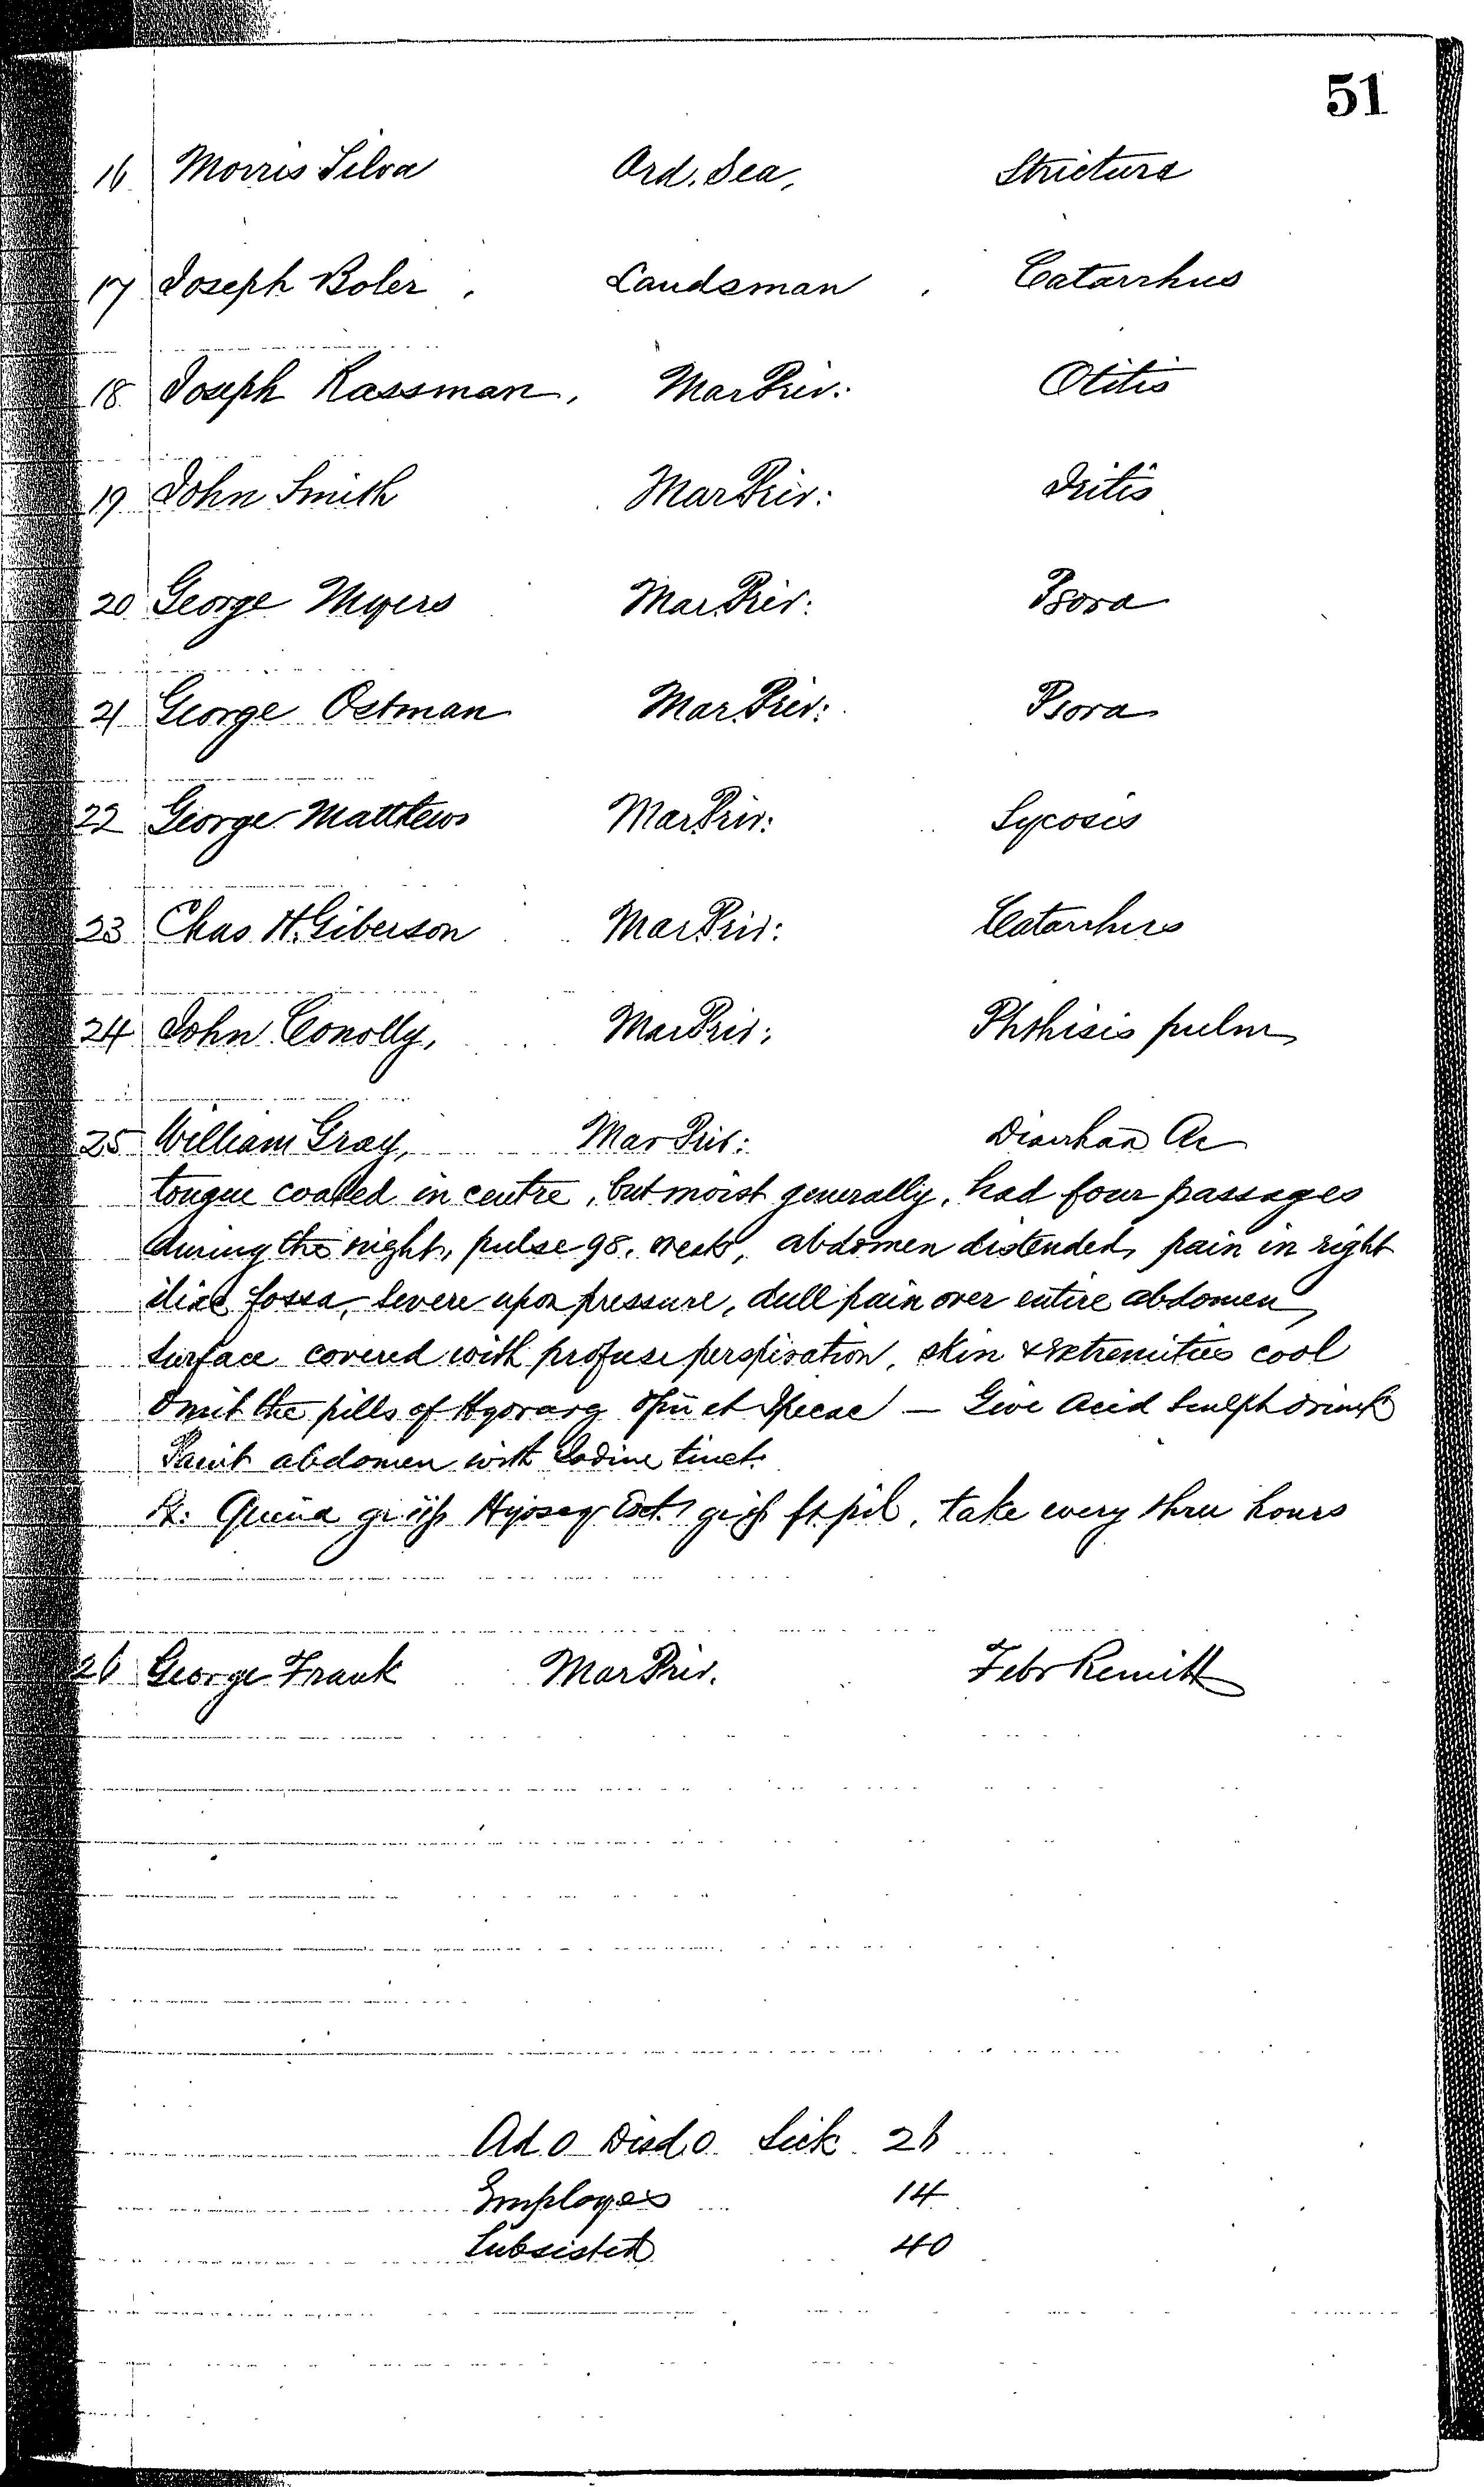 Patients in the Naval Hospital, Washington DC, on November 4, 1866, page 2 of 2, in the Medical Journal, October 1, 1866 to March 20, 1867